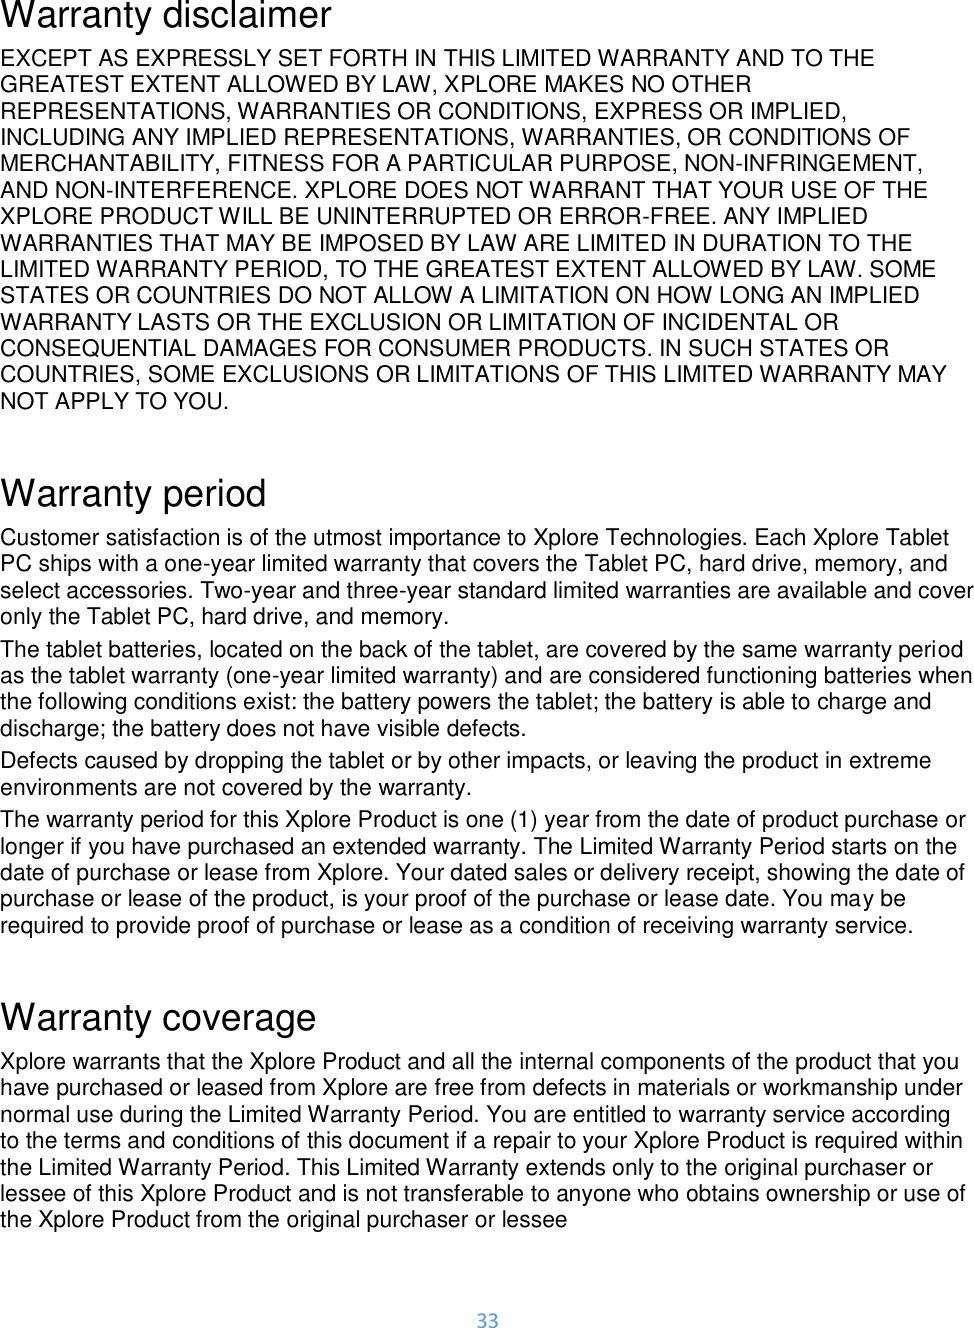 33   Warranty disclaimer EXCEPT AS EXPRESSLY SET FORTH IN THIS LIMITED WARRANTY AND TO THE GREATEST EXTENT ALLOWED BY LAW, XPLORE MAKES NO OTHER REPRESENTATIONS, WARRANTIES OR CONDITIONS, EXPRESS OR IMPLIED, INCLUDING ANY IMPLIED REPRESENTATIONS, WARRANTIES, OR CONDITIONS OF MERCHANTABILITY, FITNESS FOR A PARTICULAR PURPOSE, NON-INFRINGEMENT, AND NON-INTERFERENCE. XPLORE DOES NOT WARRANT THAT YOUR USE OF THE XPLORE PRODUCT WILL BE UNINTERRUPTED OR ERROR-FREE. ANY IMPLIED WARRANTIES THAT MAY BE IMPOSED BY LAW ARE LIMITED IN DURATION TO THE LIMITED WARRANTY PERIOD, TO THE GREATEST EXTENT ALLOWED BY LAW. SOME STATES OR COUNTRIES DO NOT ALLOW A LIMITATION ON HOW LONG AN IMPLIED WARRANTY LASTS OR THE EXCLUSION OR LIMITATION OF INCIDENTAL OR CONSEQUENTIAL DAMAGES FOR CONSUMER PRODUCTS. IN SUCH STATES OR COUNTRIES, SOME EXCLUSIONS OR LIMITATIONS OF THIS LIMITED WARRANTY MAY NOT APPLY TO YOU.   Warranty period Customer satisfaction is of the utmost importance to Xplore Technologies. Each Xplore Tablet PC ships with a one-year limited warranty that covers the Tablet PC, hard drive, memory, and select accessories. Two-year and three-year standard limited warranties are available and cover only the Tablet PC, hard drive, and memory.  The tablet batteries, located on the back of the tablet, are covered by the same warranty period as the tablet warranty (one-year limited warranty) and are considered functioning batteries when the following conditions exist: the battery powers the tablet; the battery is able to charge and discharge; the battery does not have visible defects. Defects caused by dropping the tablet or by other impacts, or leaving the product in extreme environments are not covered by the warranty.  The warranty period for this Xplore Product is one (1) year from the date of product purchase or longer if you have purchased an extended warranty. The Limited Warranty Period starts on the date of purchase or lease from Xplore. Your dated sales or delivery receipt, showing the date of purchase or lease of the product, is your proof of the purchase or lease date. You may be required to provide proof of purchase or lease as a condition of receiving warranty service.  Warranty coverage Xplore warrants that the Xplore Product and all the internal components of the product that you have purchased or leased from Xplore are free from defects in materials or workmanship under normal use during the Limited Warranty Period. You are entitled to warranty service according to the terms and conditions of this document if a repair to your Xplore Product is required within the Limited Warranty Period. This Limited Warranty extends only to the original purchaser or lessee of this Xplore Product and is not transferable to anyone who obtains ownership or use of the Xplore Product from the original purchaser or lessee  